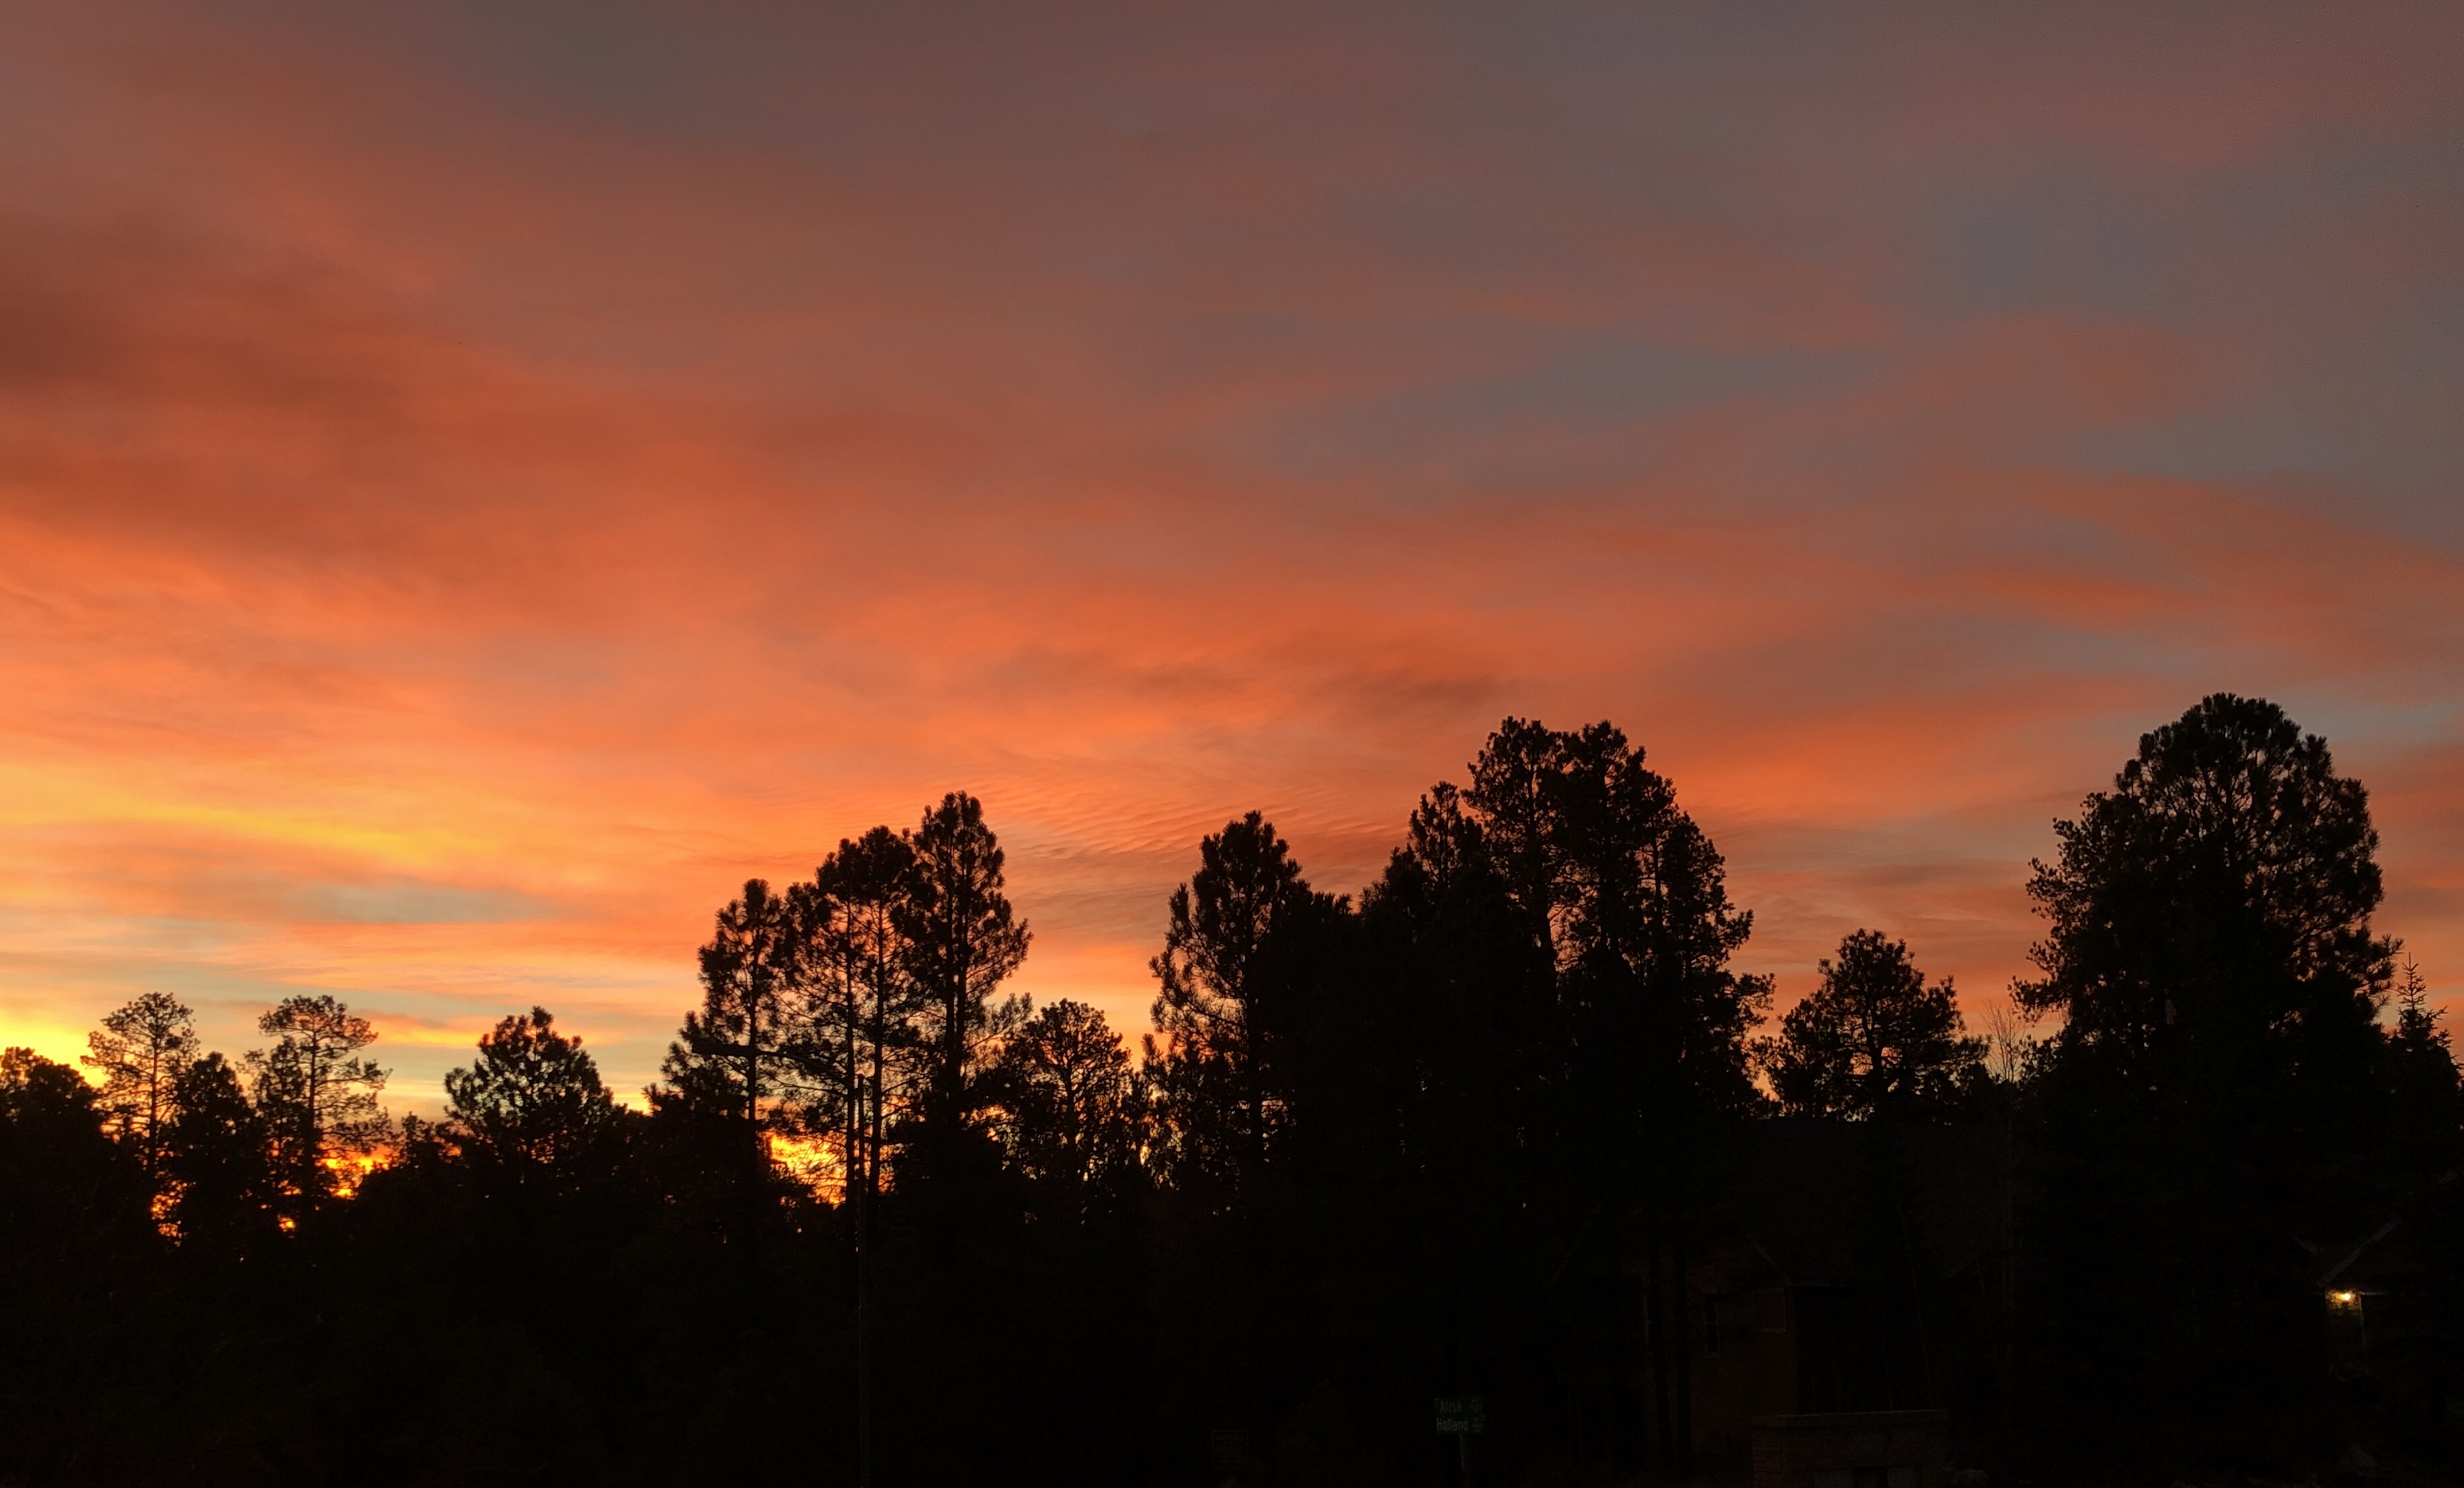 Black ponderosa pines in the foreground, backlit by a bright orange and pink cloudscape 